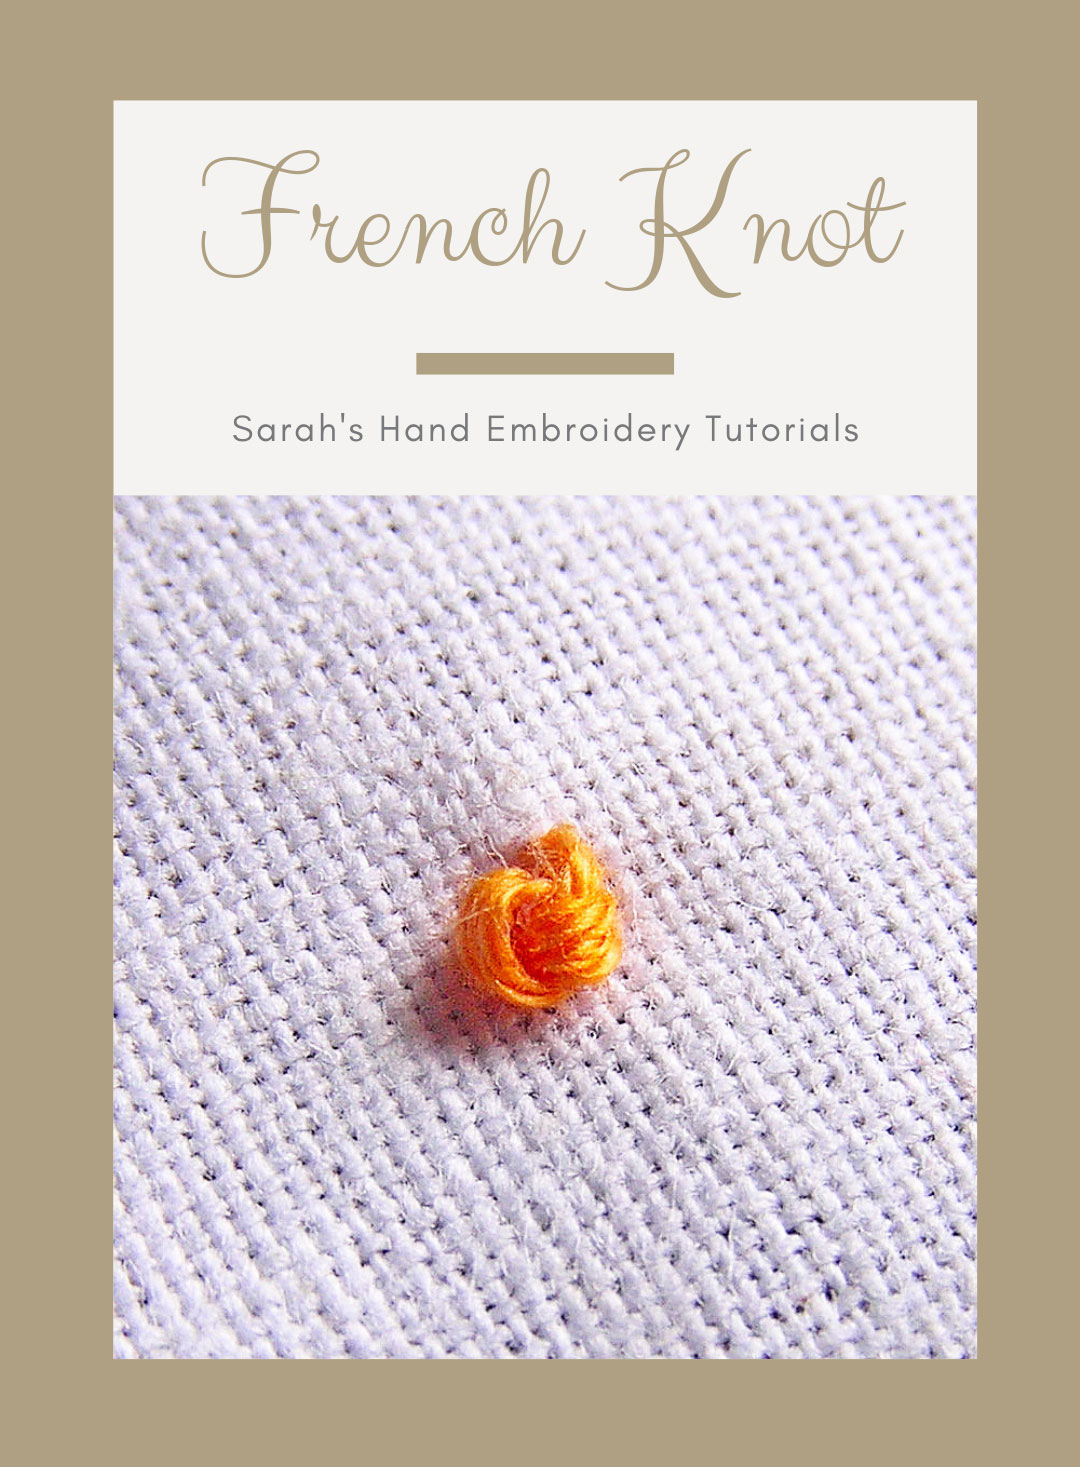 Learn Hand Embroidery with Me: Needle Threading and Away Knot